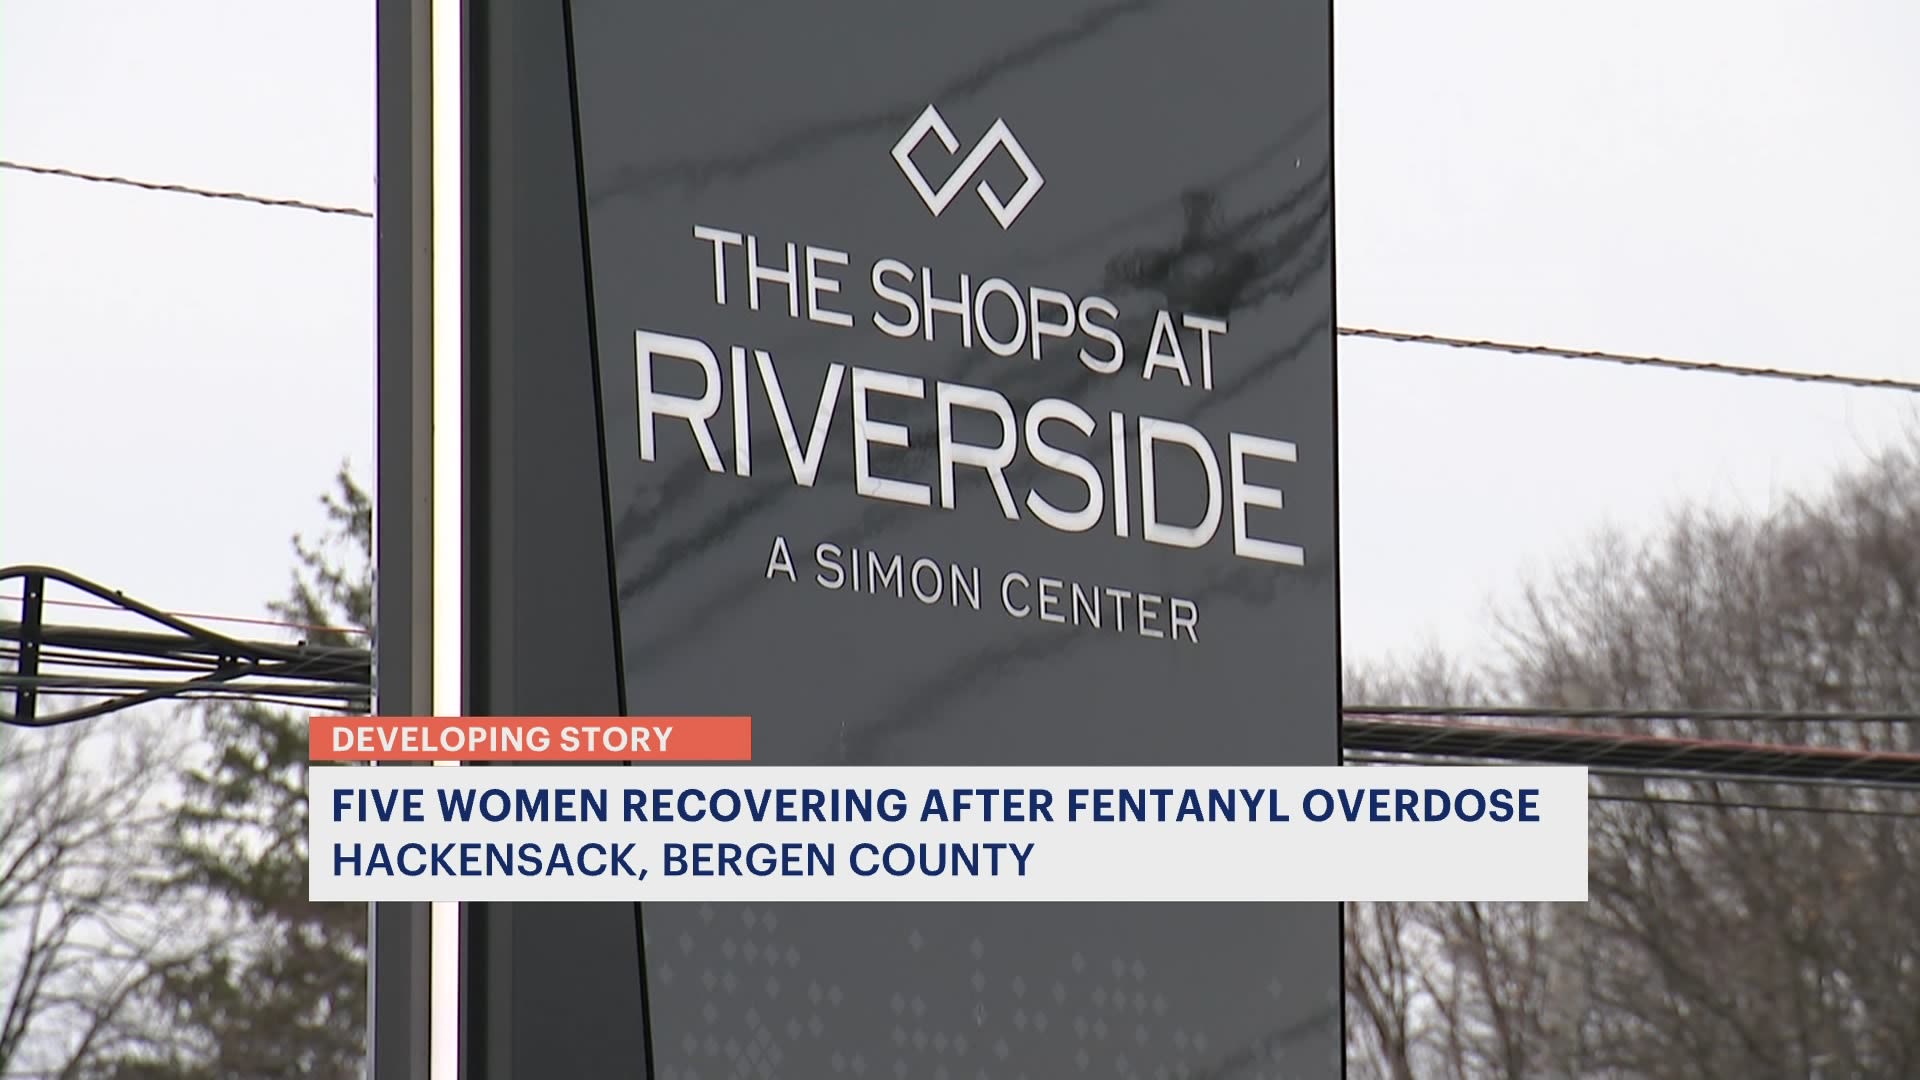 5 workers overdose on fentanyl in parking lot of NJ mall